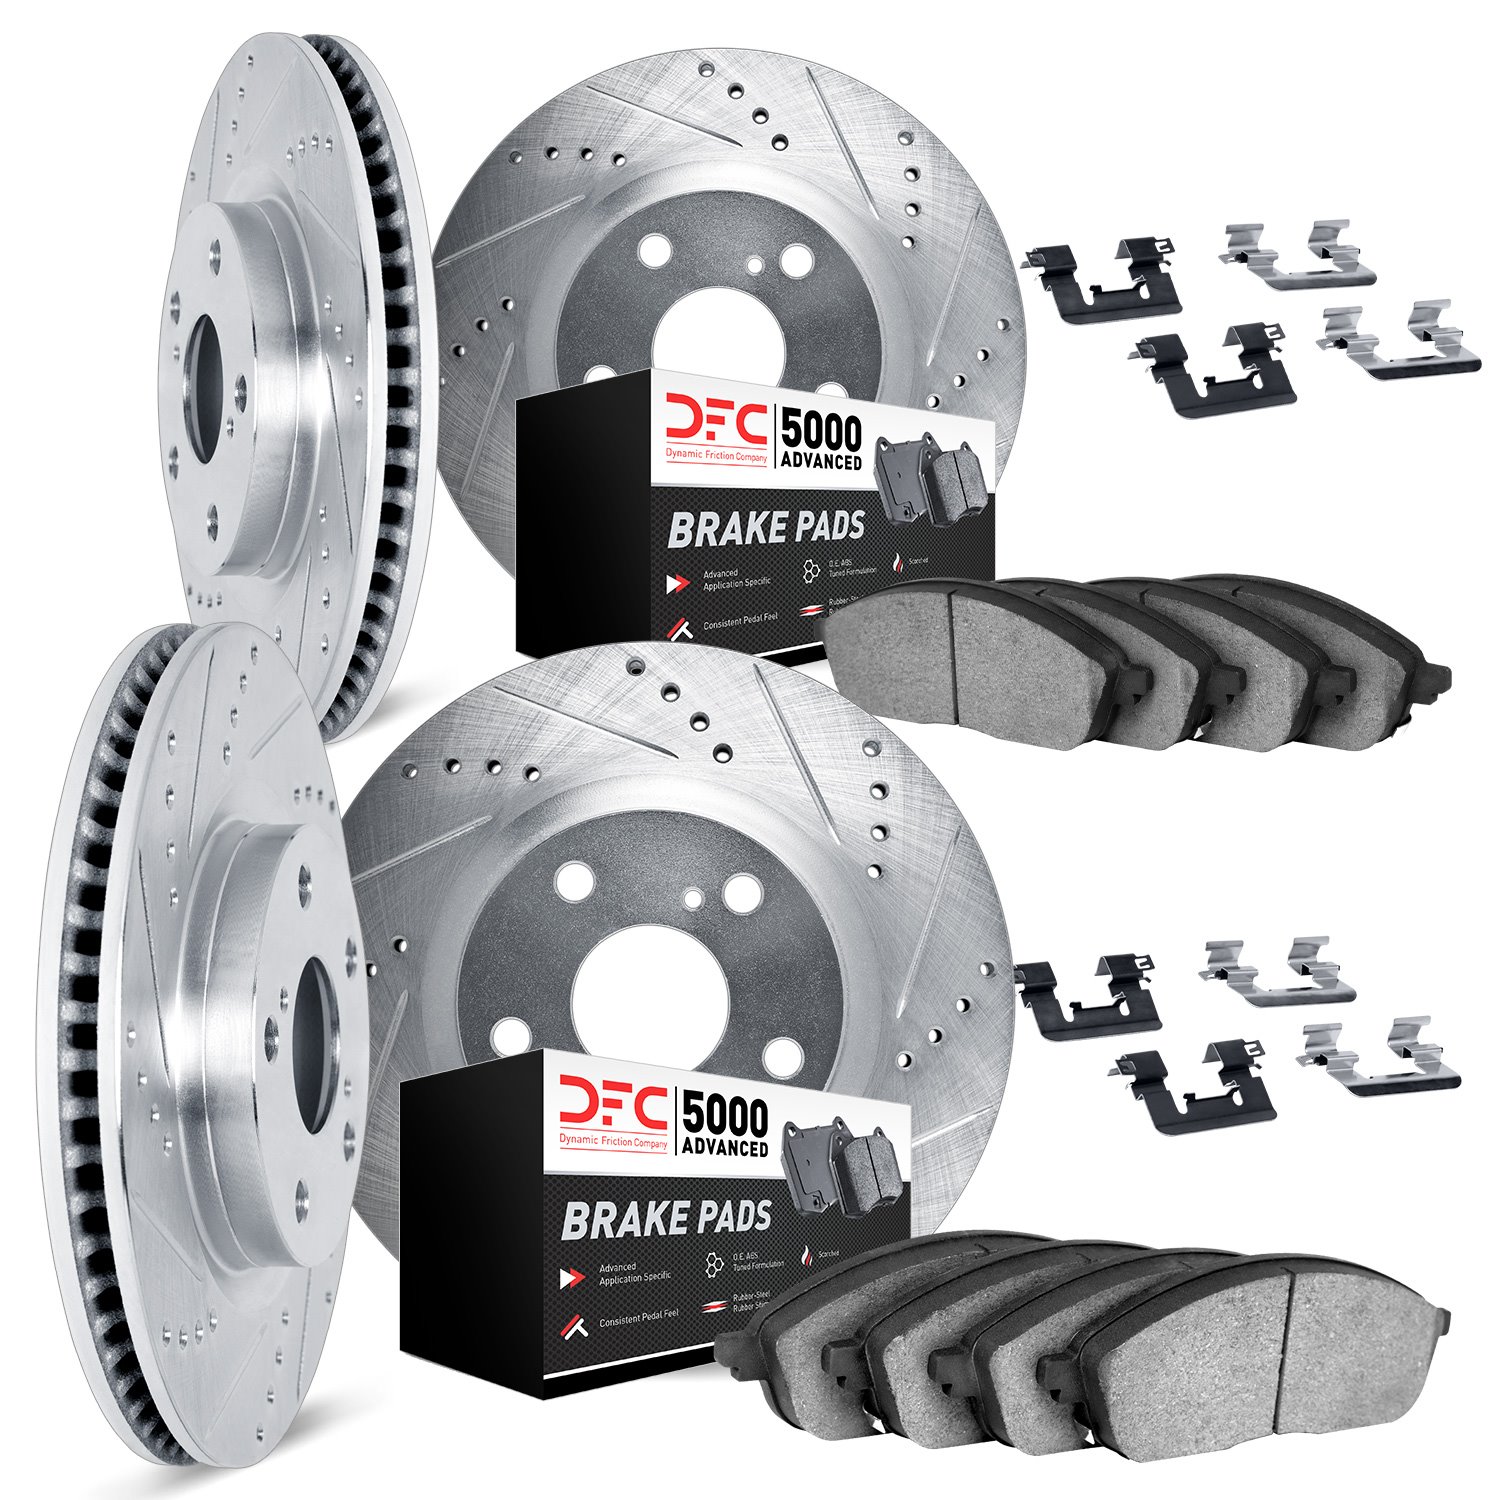 7514-13020 Drilled/Slotted Brake Rotors w/5000 Advanced Brake Pads Kit & Hardware [Silver], Fits Select Subaru, Position: Front